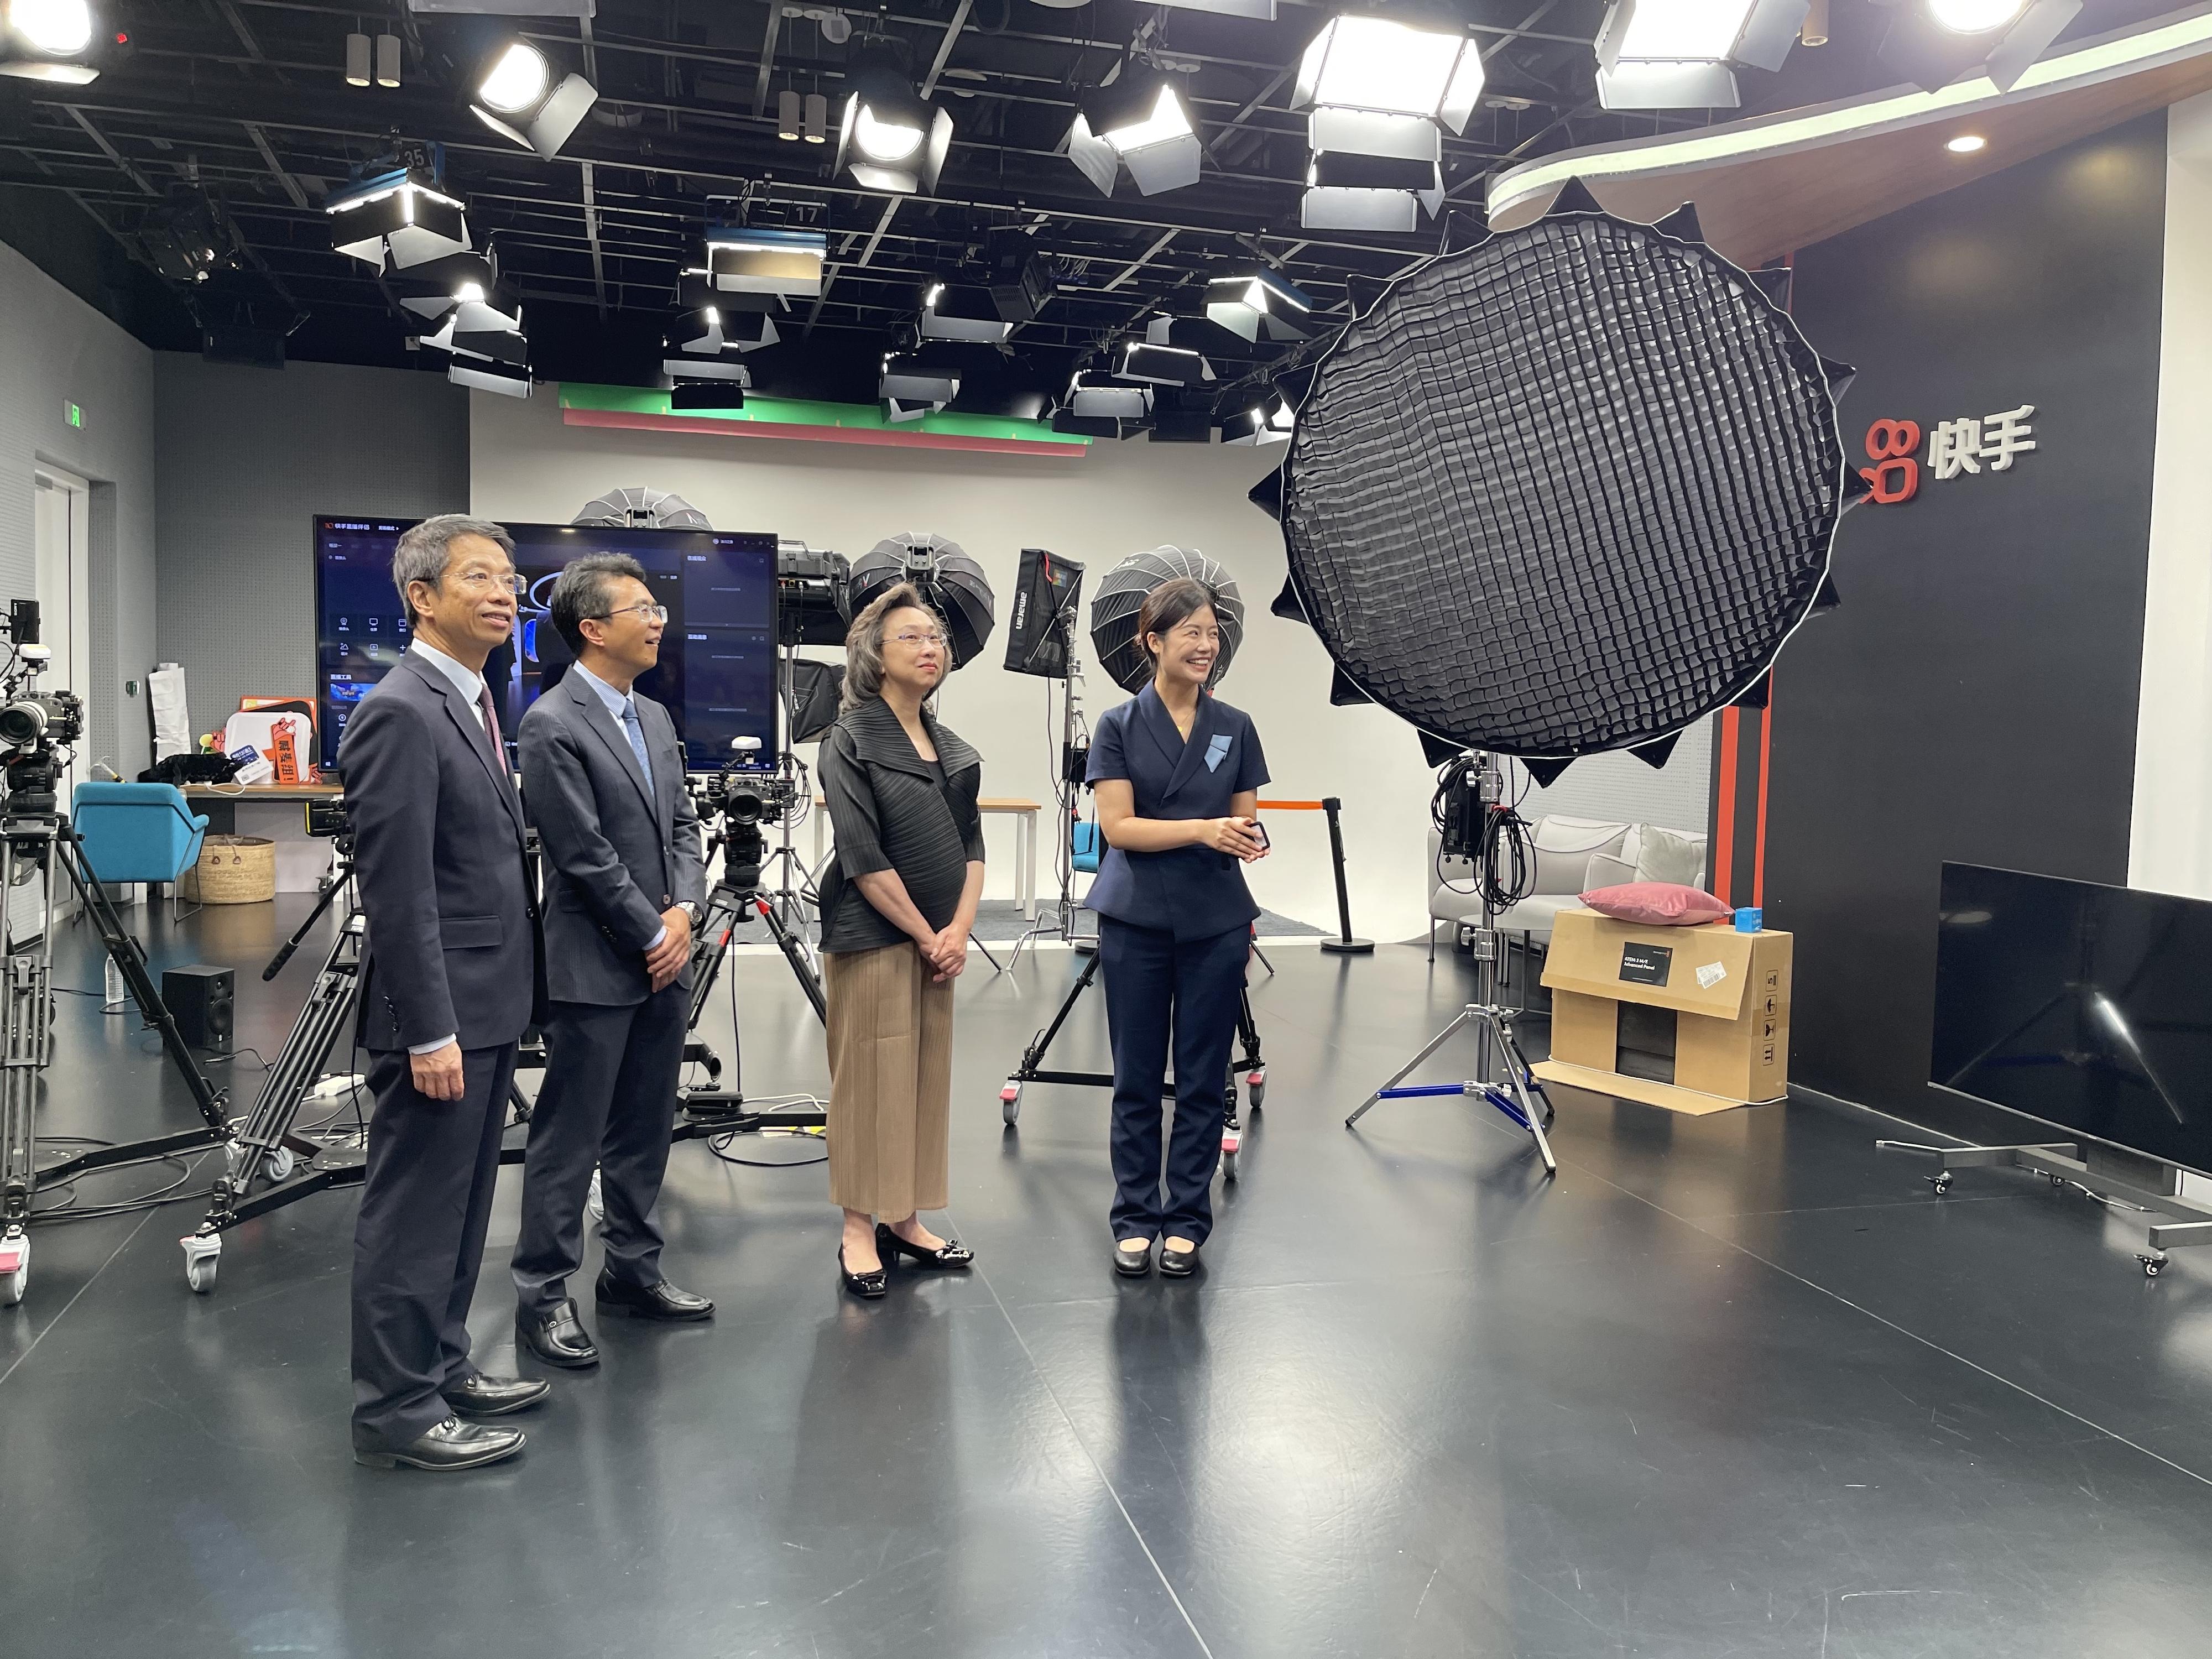 The Secretary for the Civil Service, Mrs Ingrid Yeung, began her visit in Beijing today (July 2). Photo shows Mrs Yeung (second right) and the Permanent Secretary for the Civil Service, Mr Clement Leung (first left), visiting the broadcasting centre at the headquarters of Kuaishou this afternoon. Looking on is Vice President of Beijing Kuaishou Technology Company Ltd Mr Liu Zhen (second left).